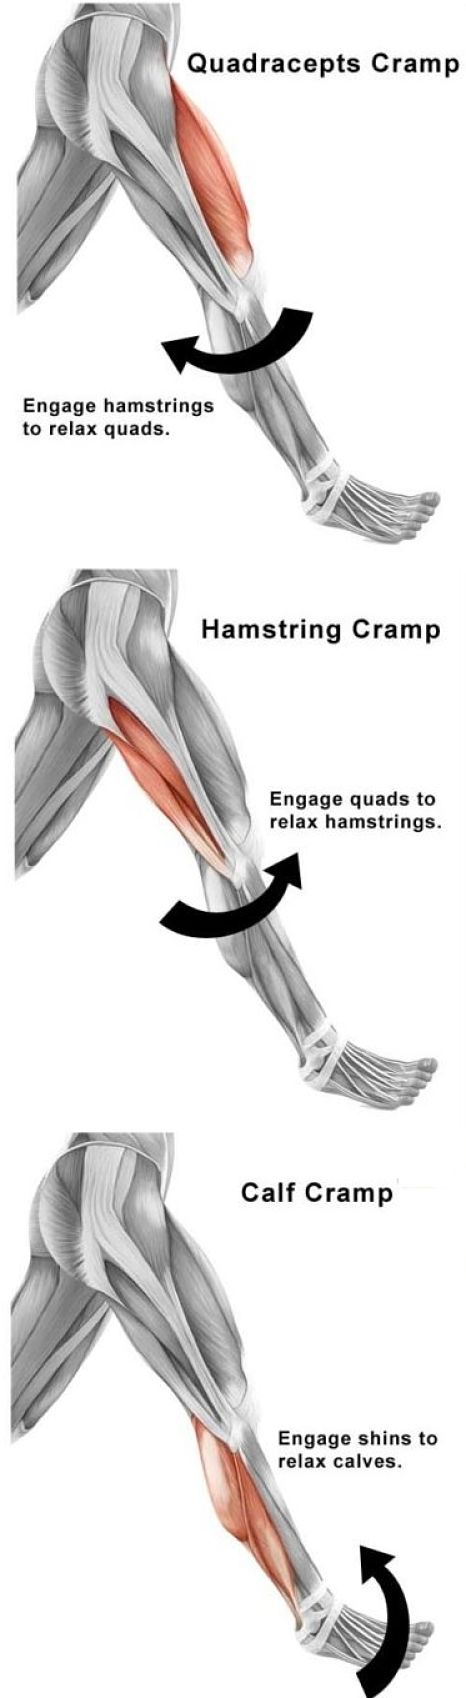 Types of leg cramps and which muscles are affected - see more details about the causes here